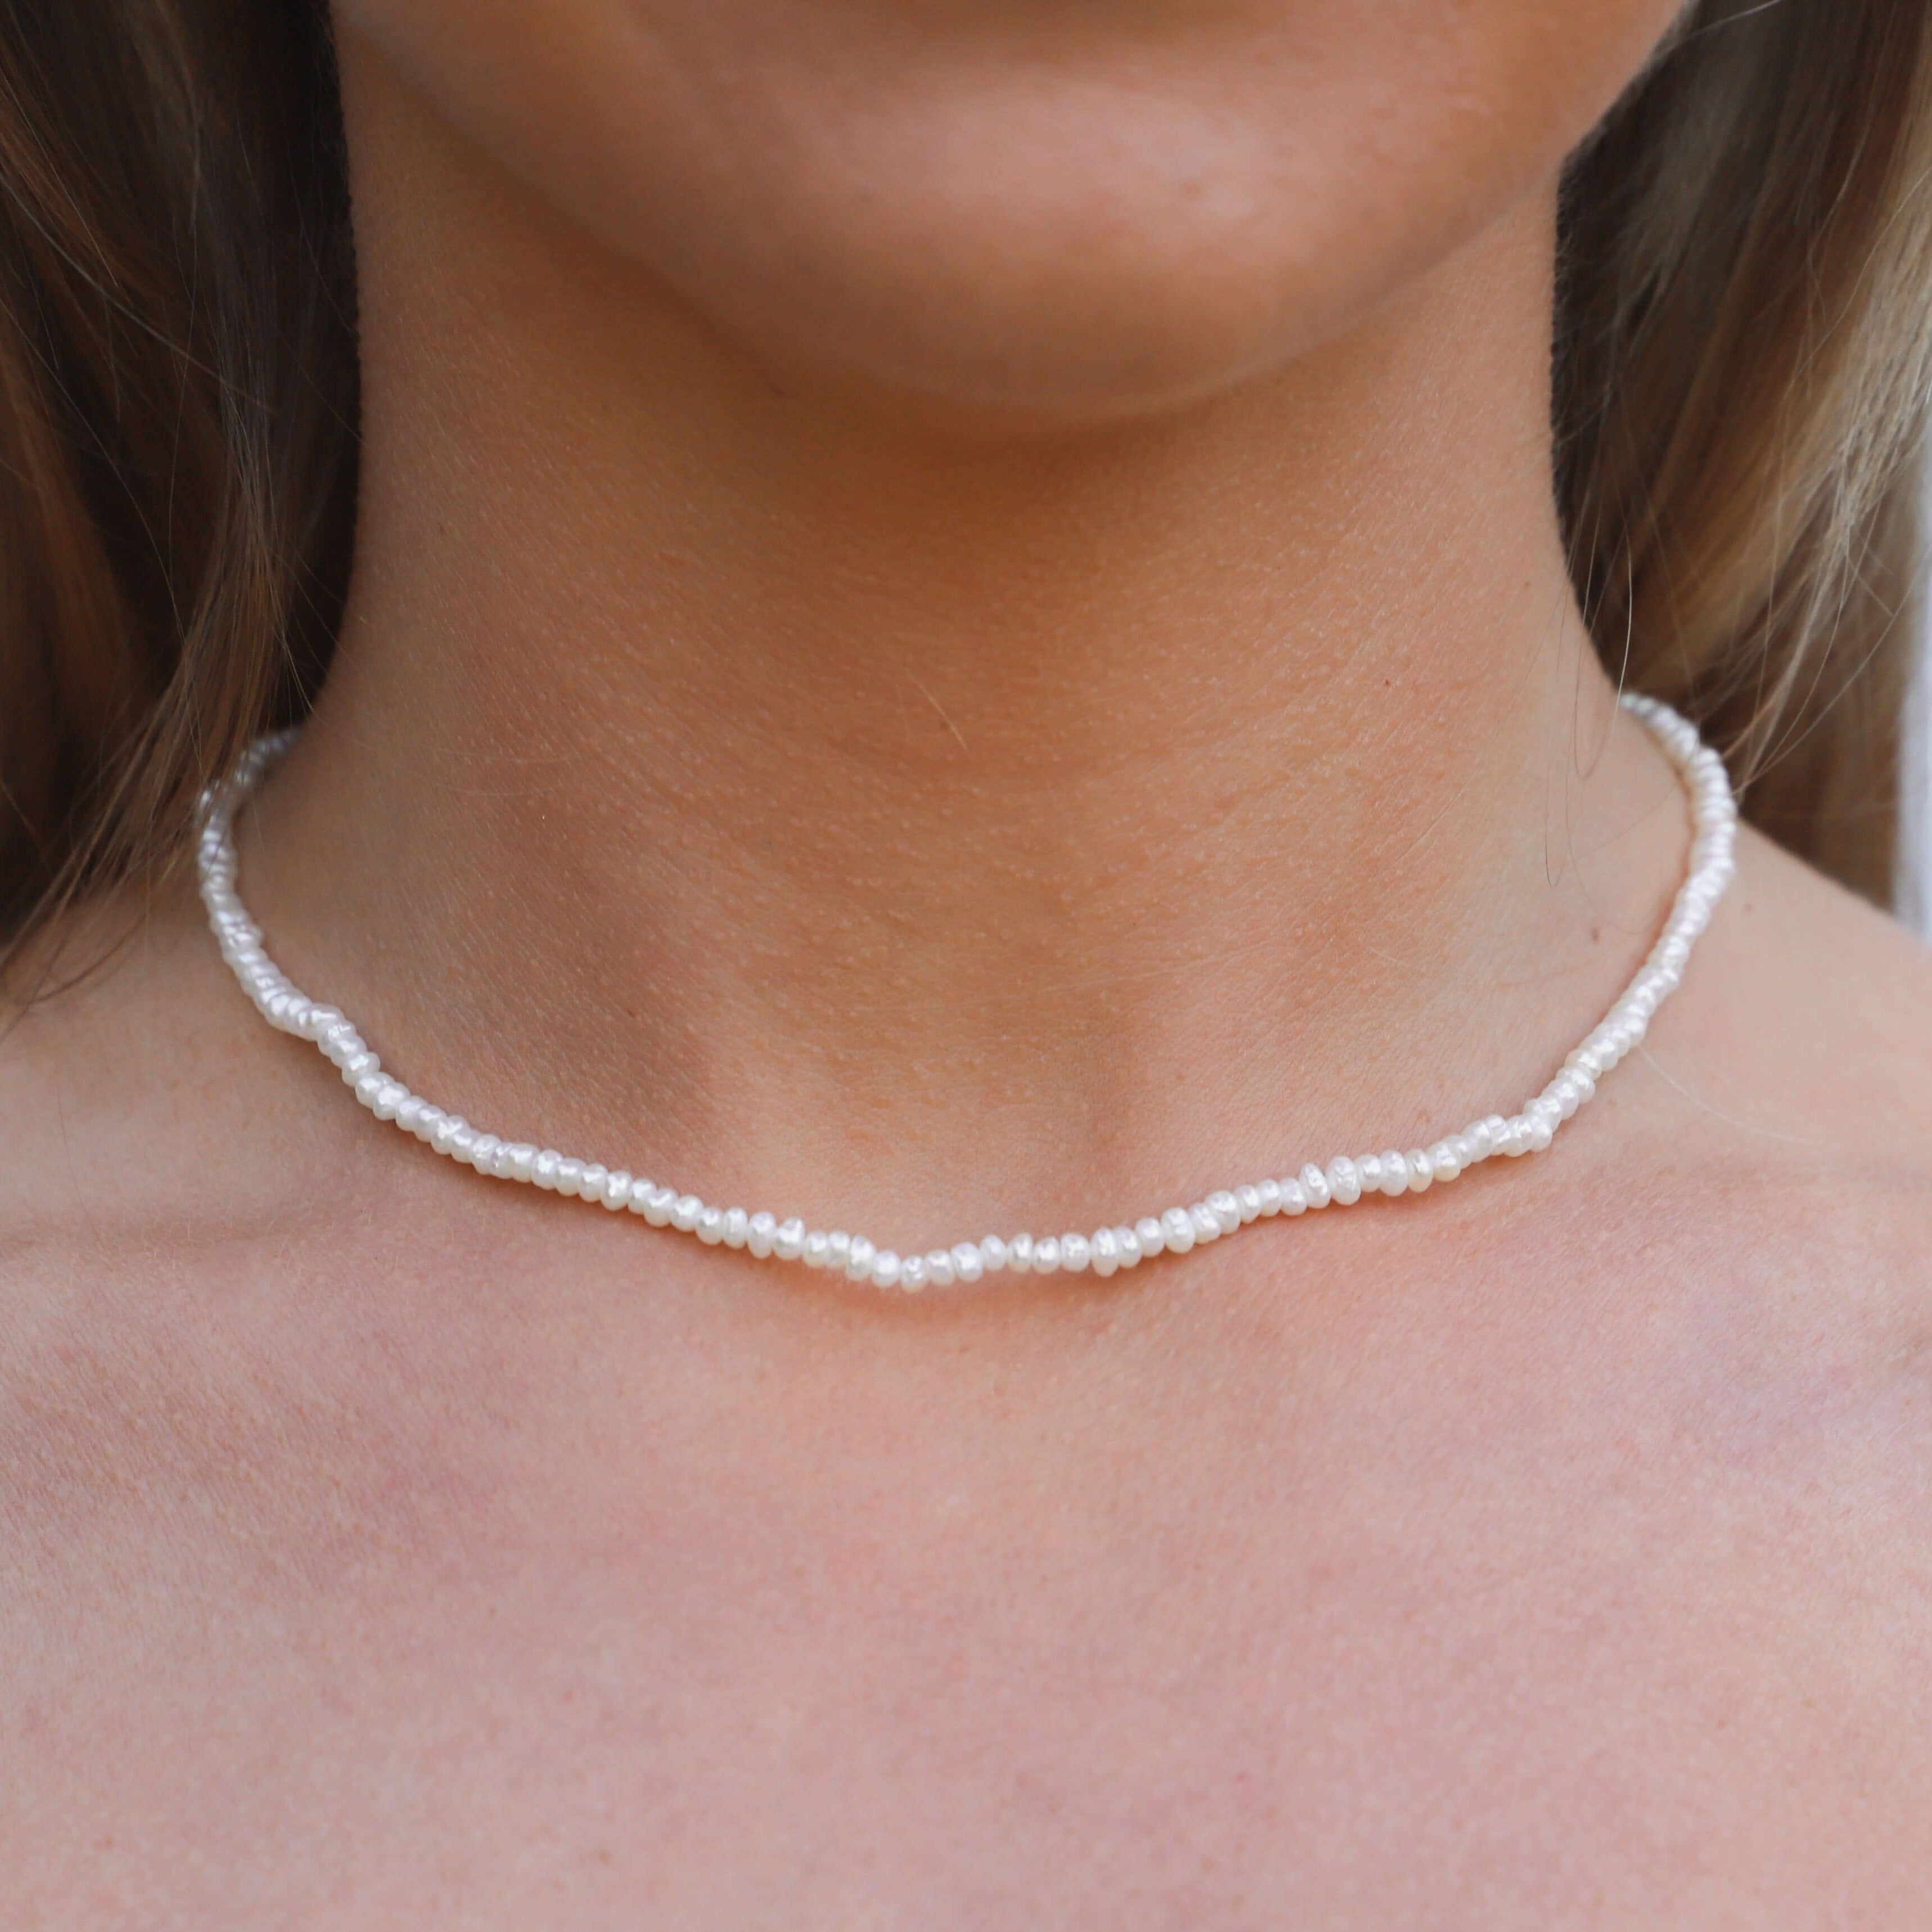 mini freshwater pearl necklace close up on model